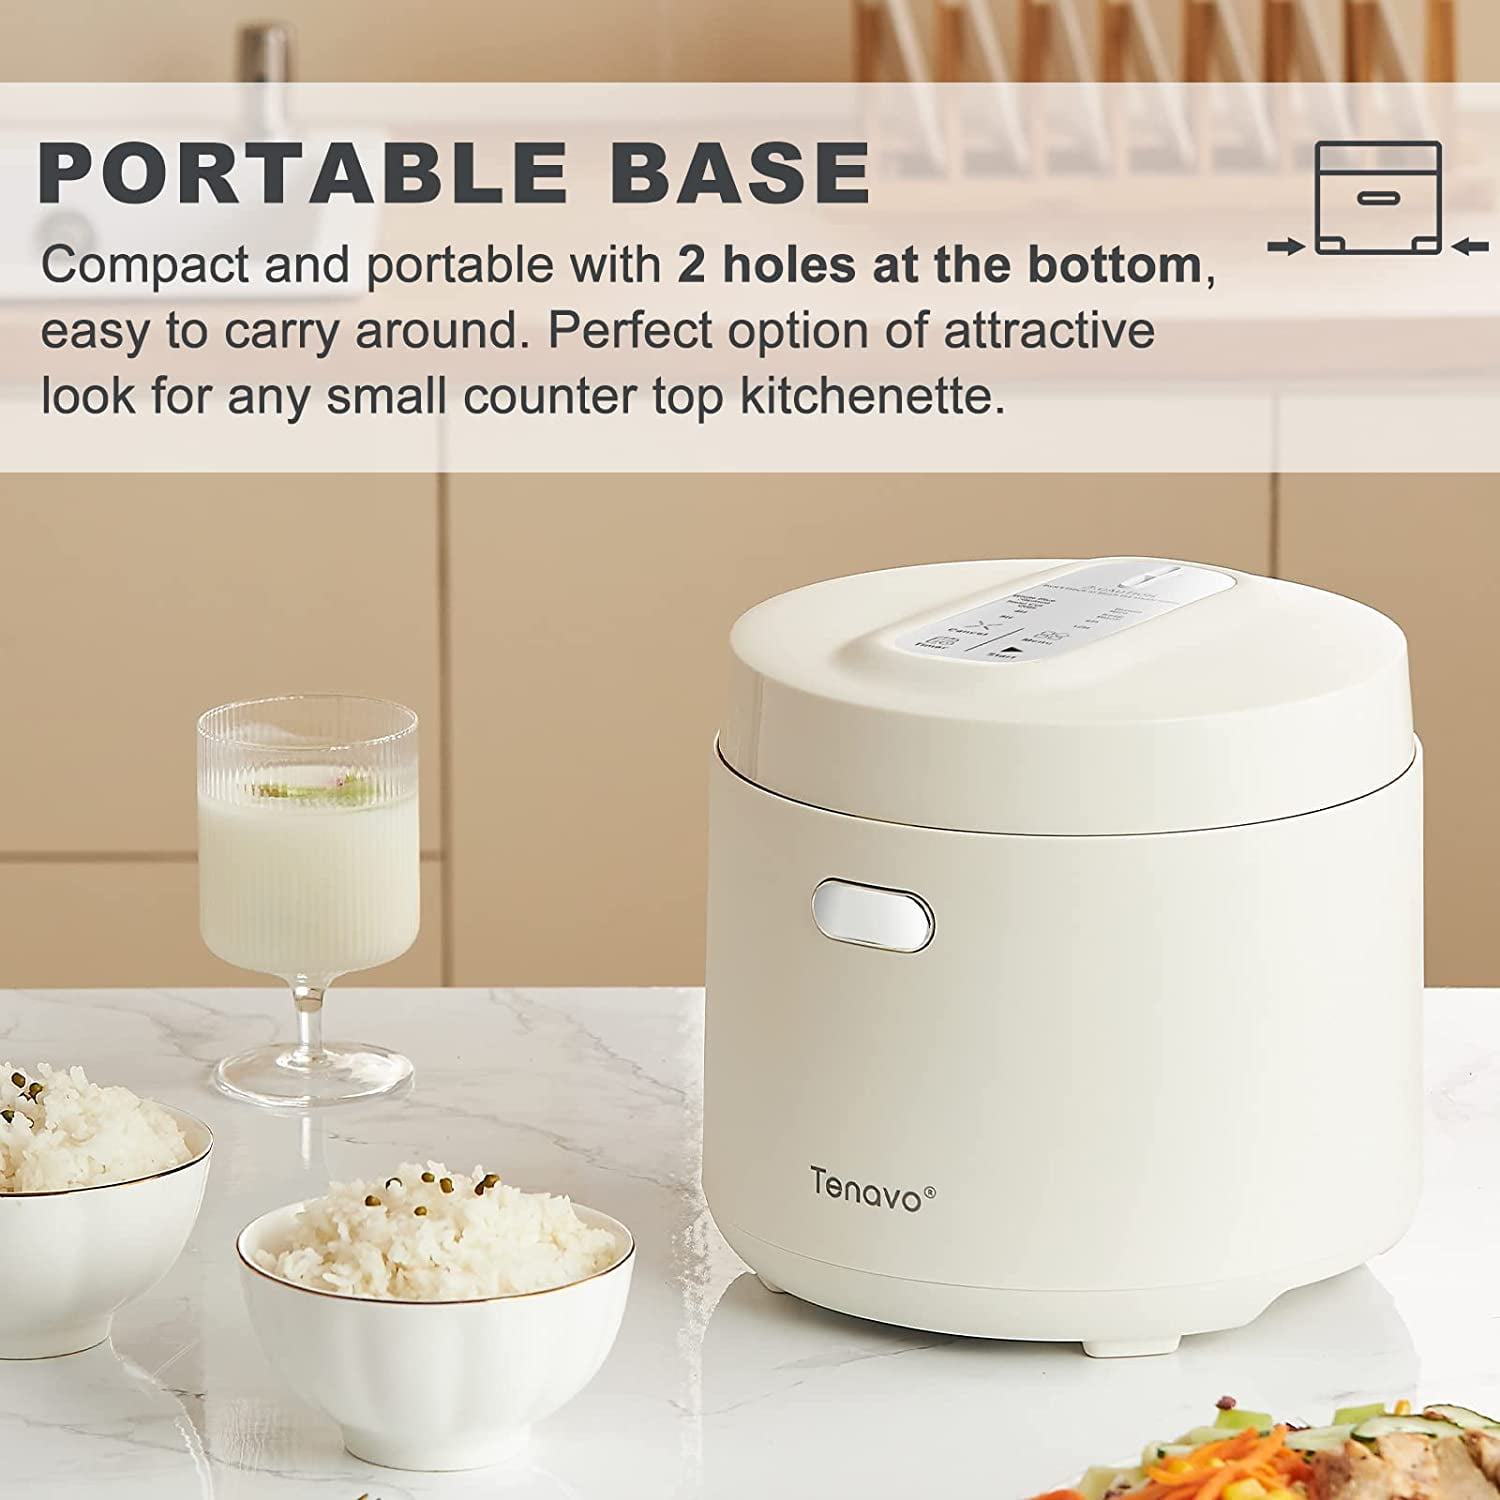 1 Tenavo Digital Mini Rice cooker 4 cups Uncooked, 2L Rice cooker Small,  Portable Rice cooker Small for 3-4 People, Travel Rice co